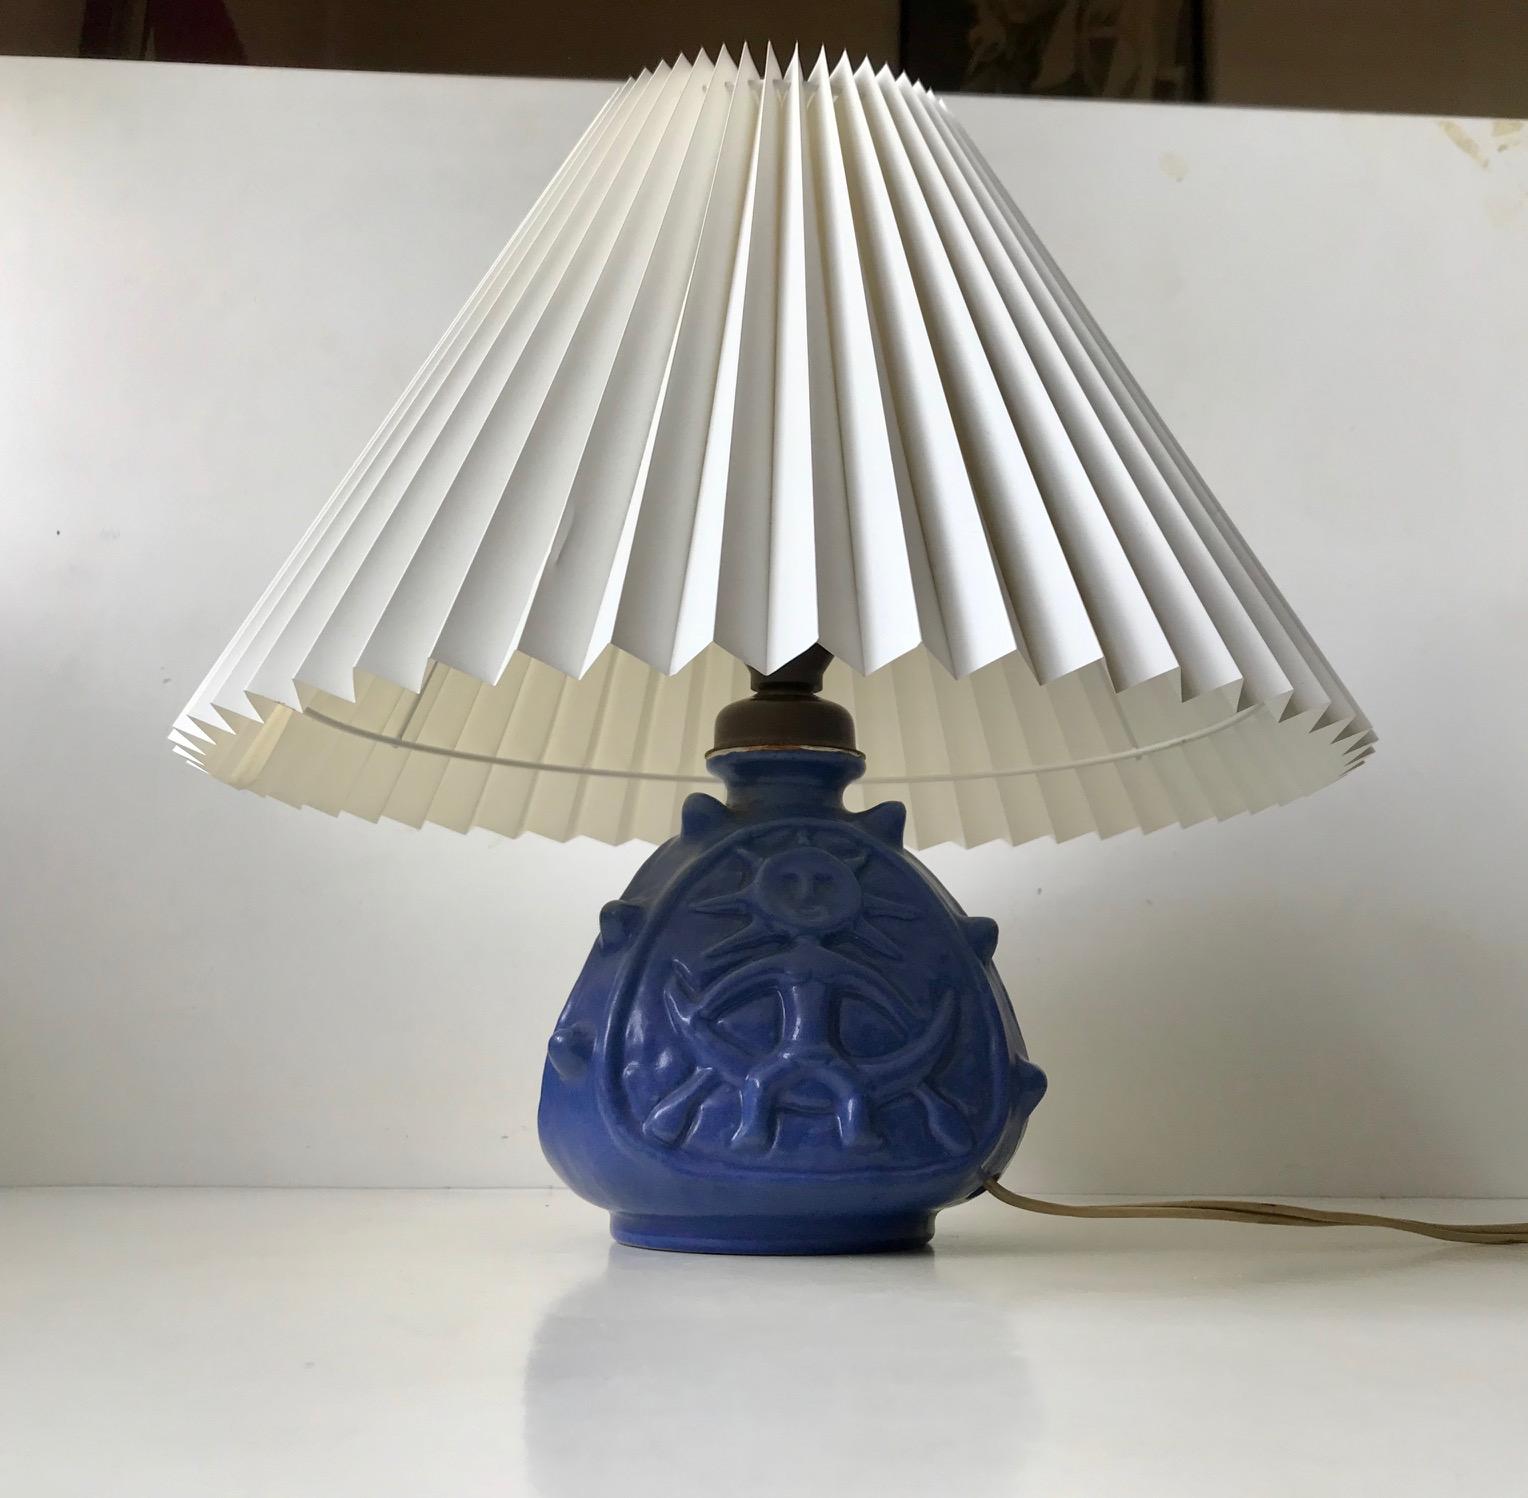 Blue glazed spiky ceramic table lamp with two sides with troll motifs. Designed and manufactured by Lauritz Hjorth on the Island of Bornholm in Denmark around 1940. Please provide your own shade as the one in the picture is a model shade only. The